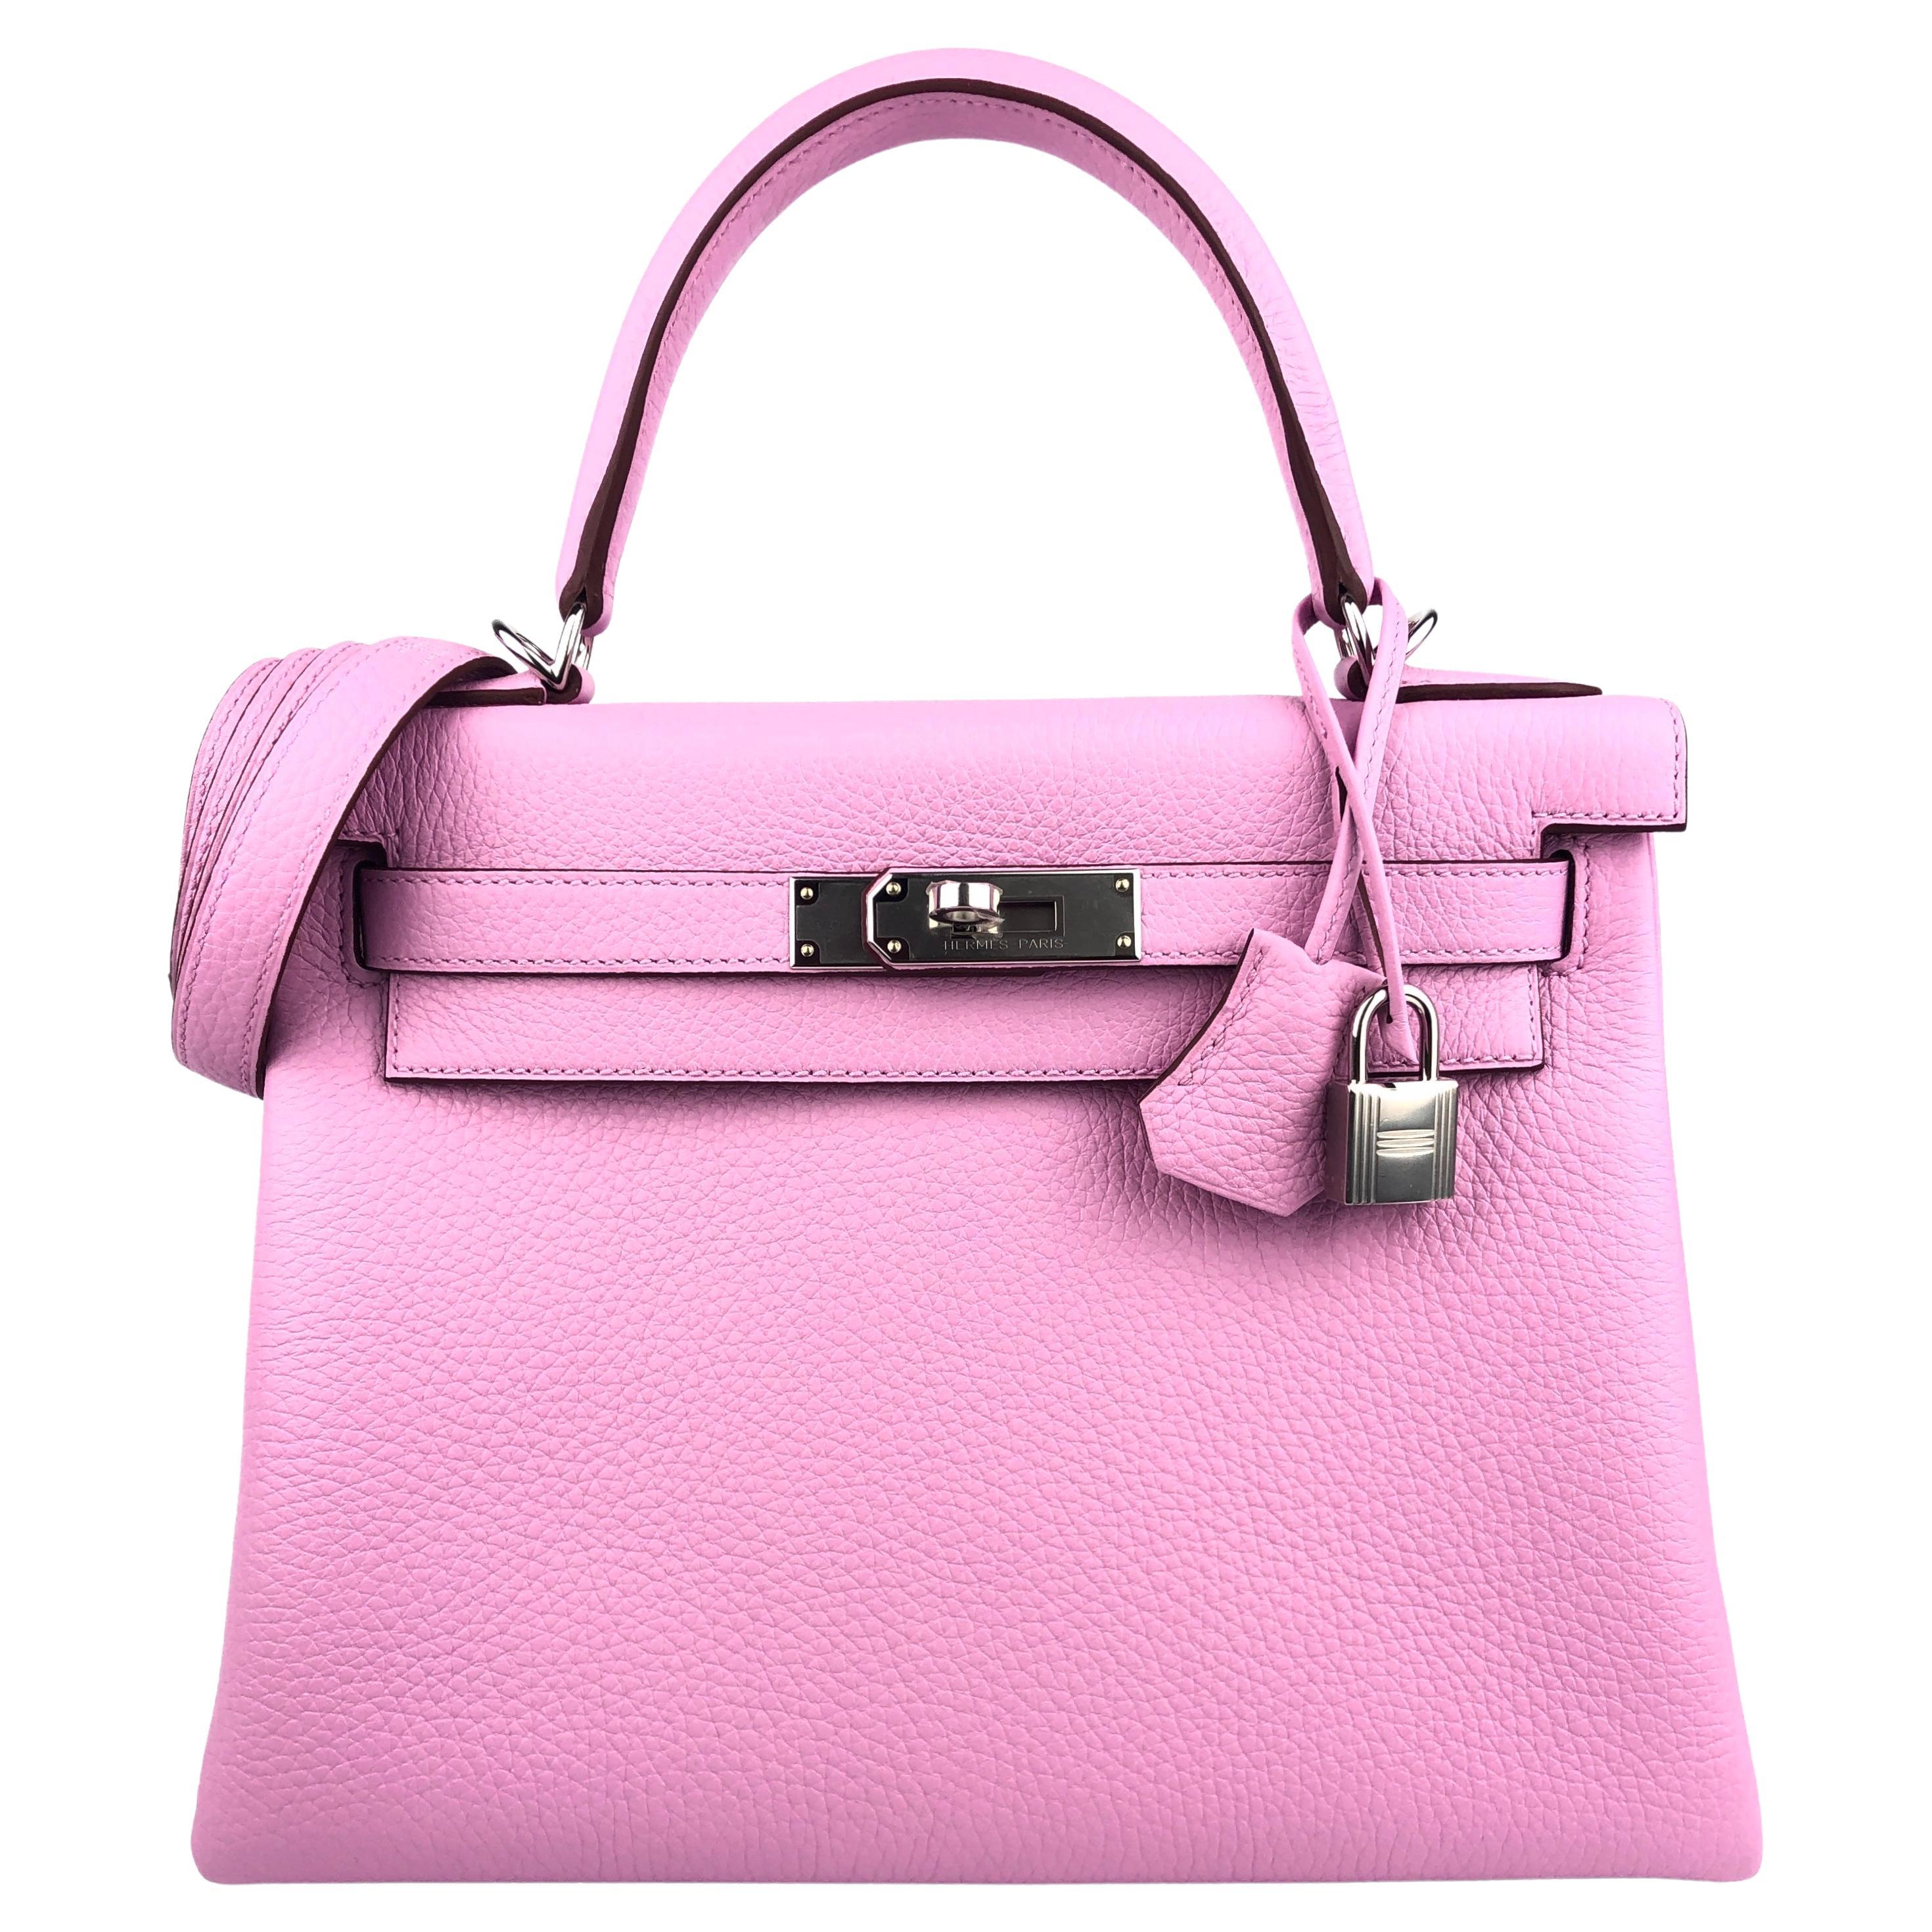 Hermes Kelly 28 Mauve Sylvester Pink Leather Palladium Hardware NEW For Sale